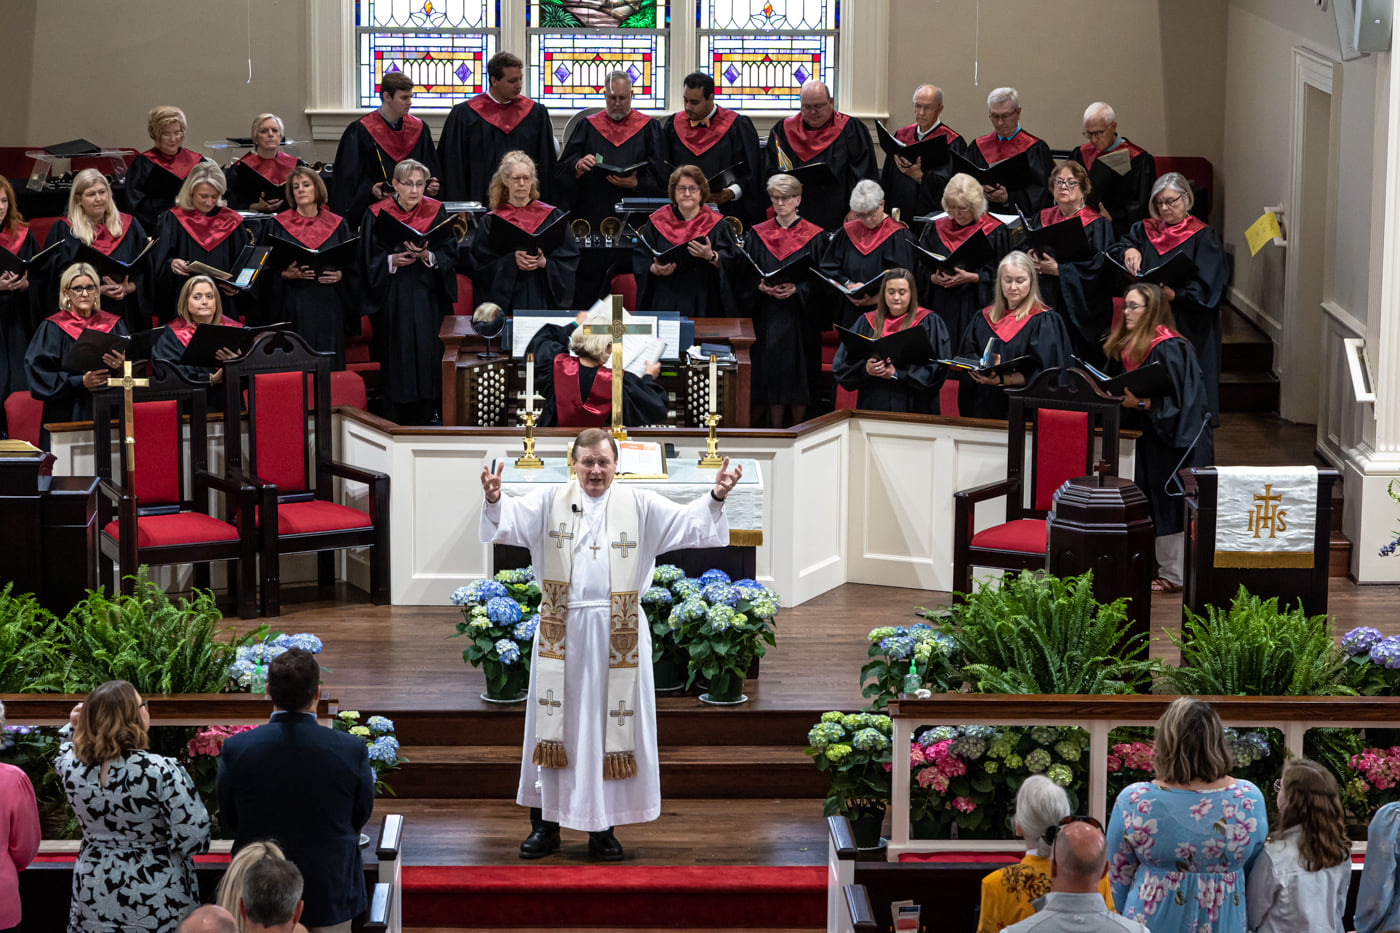 Paster gives benediction on Easter Sunday